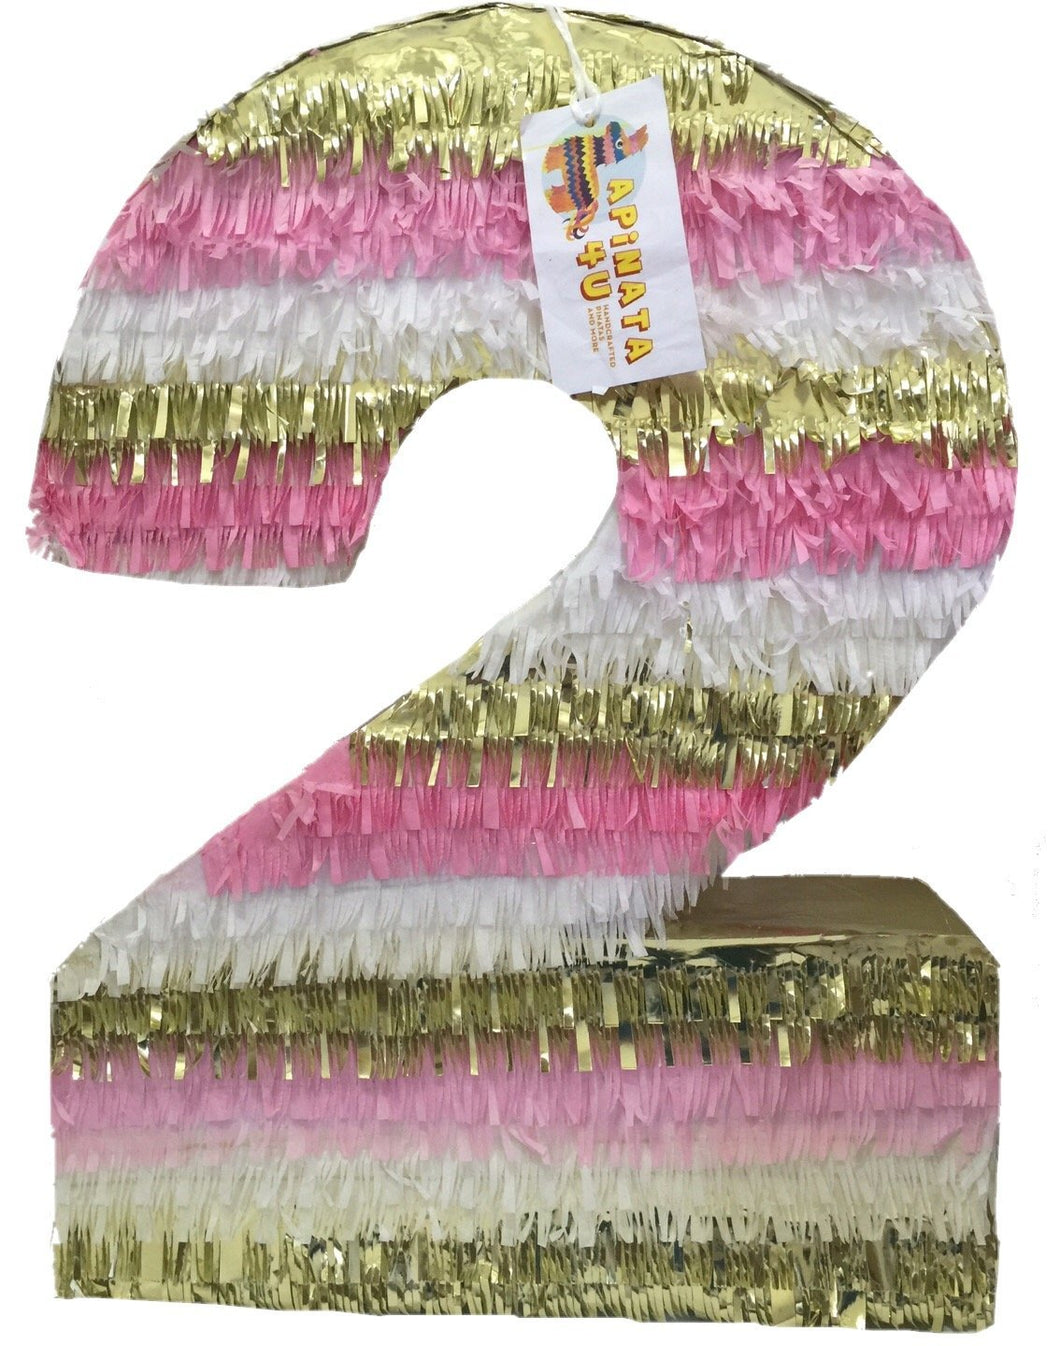 Large Pink Gold & White Number Two Pinata 20